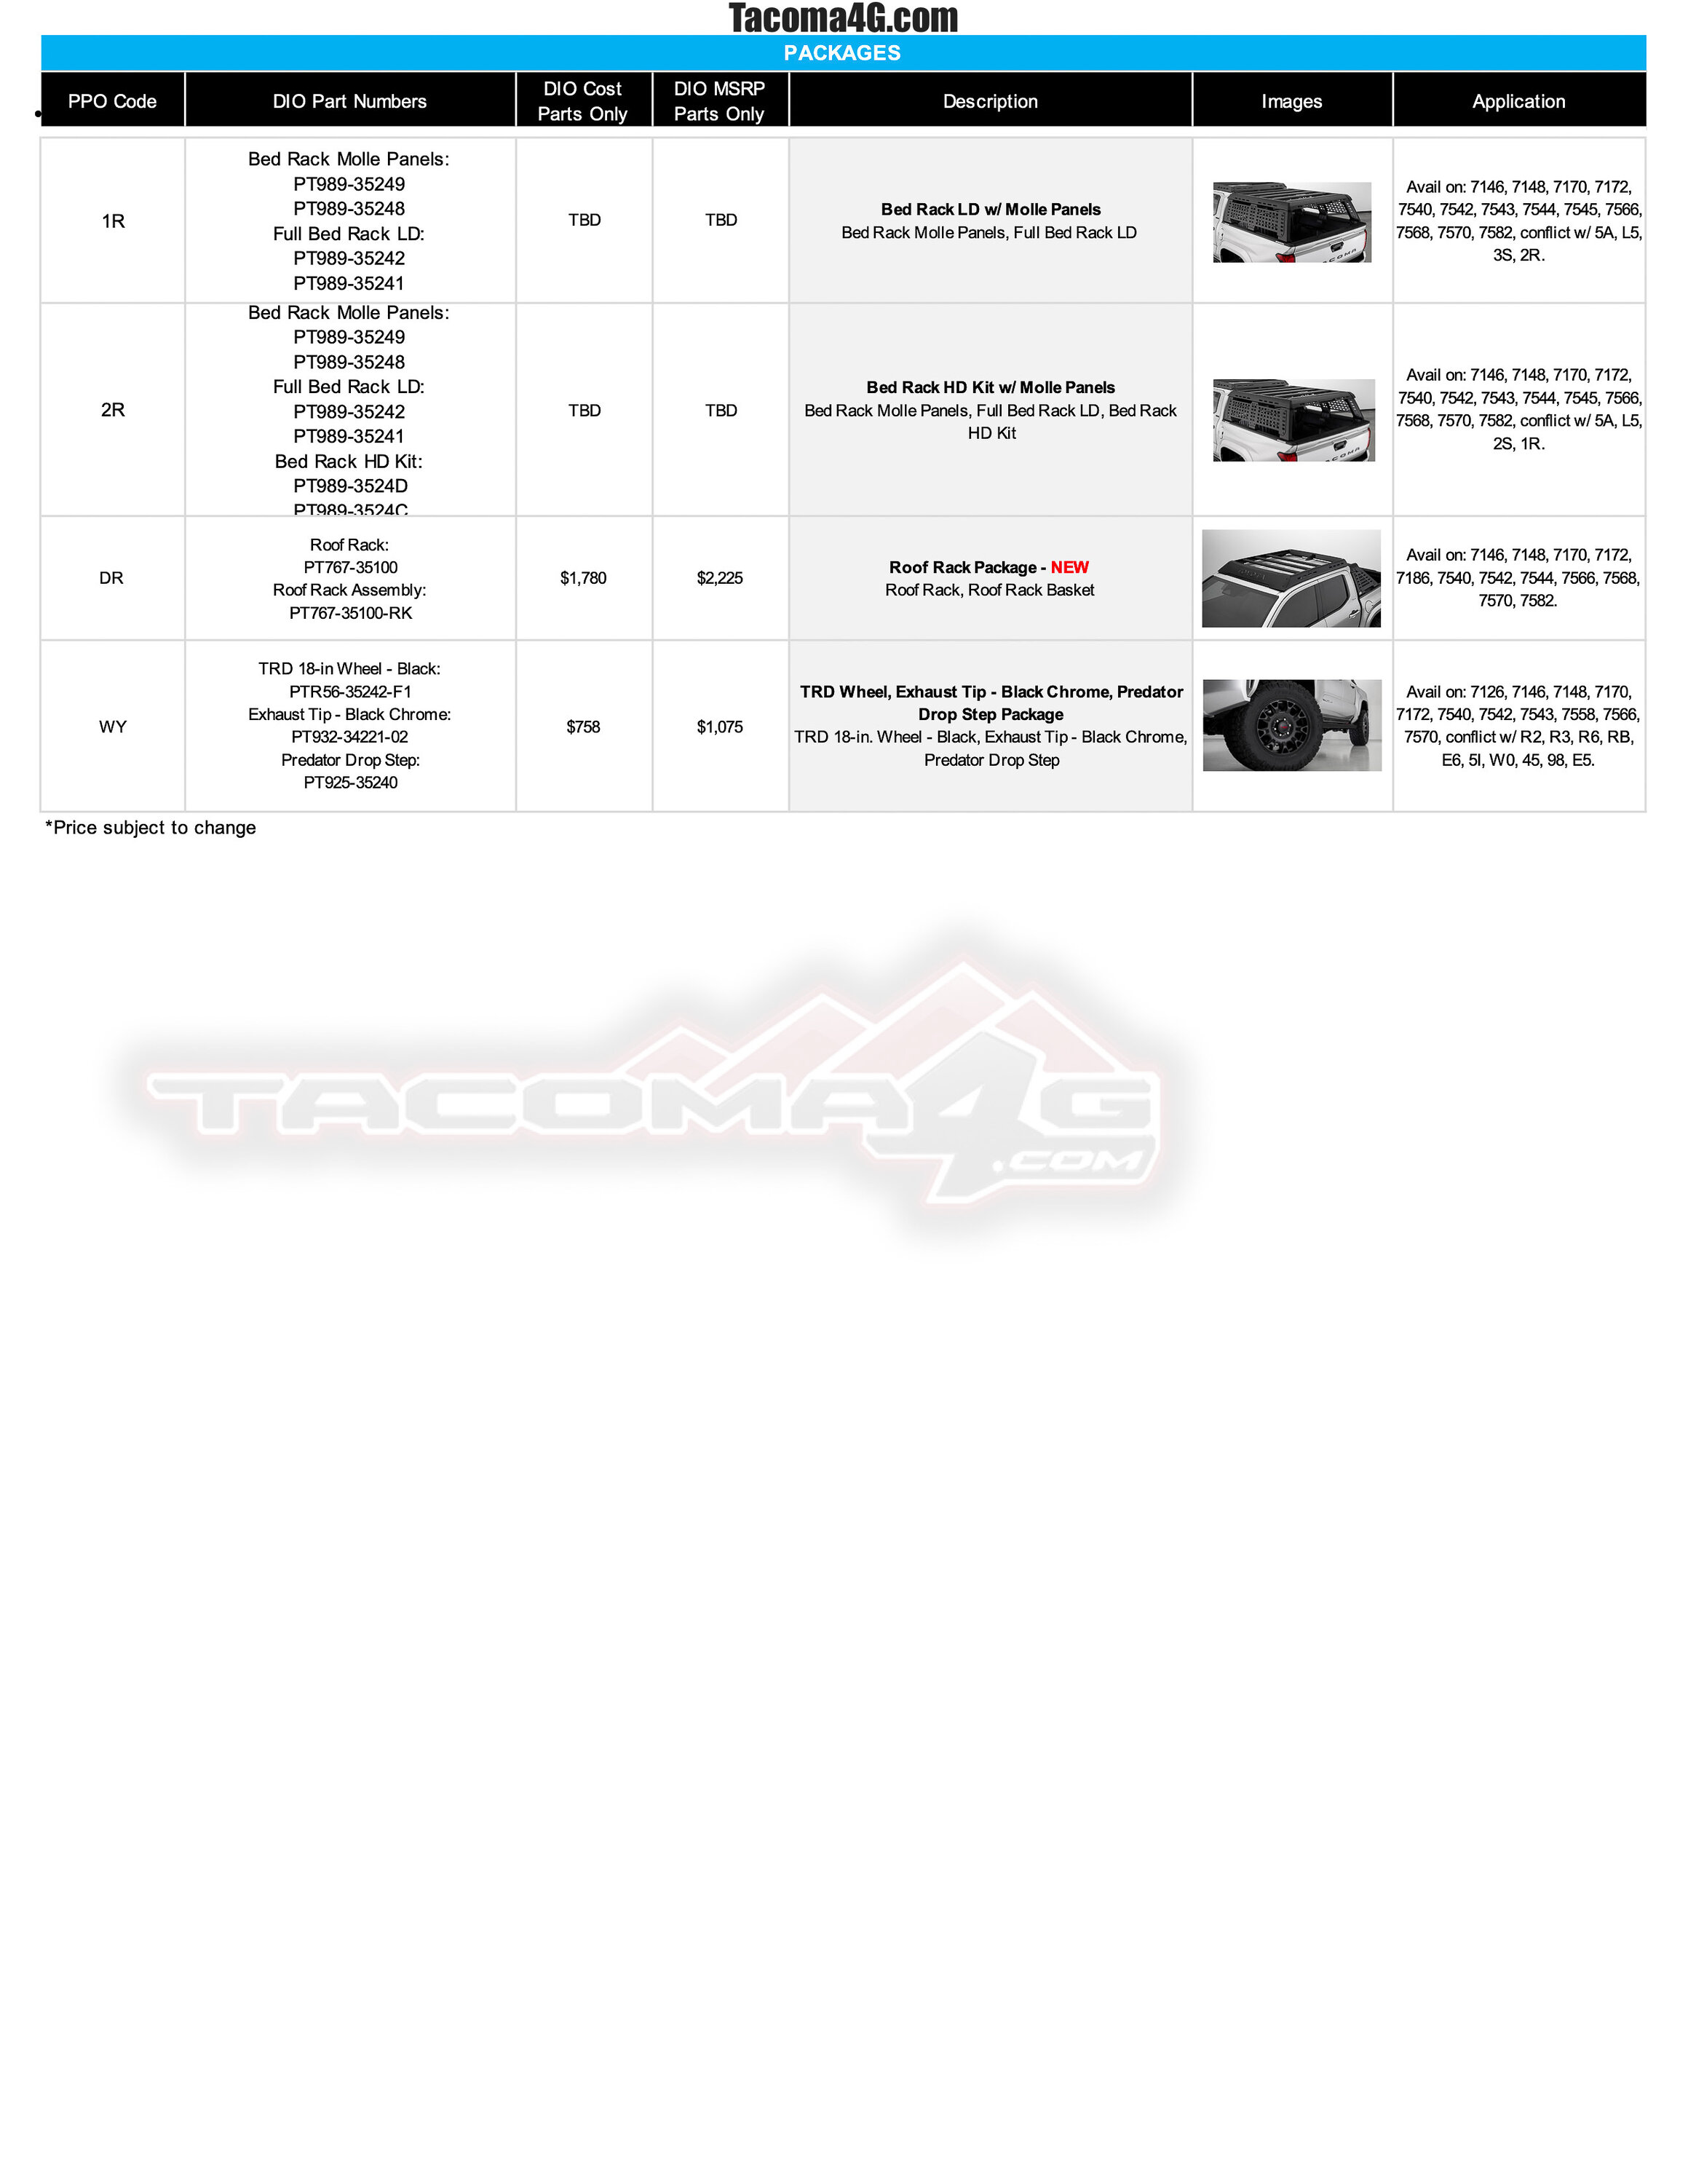 2024 Tacoma 2024 Tacoma Dealer Installed Options (DIO) Accessories Parts Guide + Pricing (Updated 5/7/24) 2024-Tacoma-DIO-Accessories-Parts-Guide_01_31_24-7